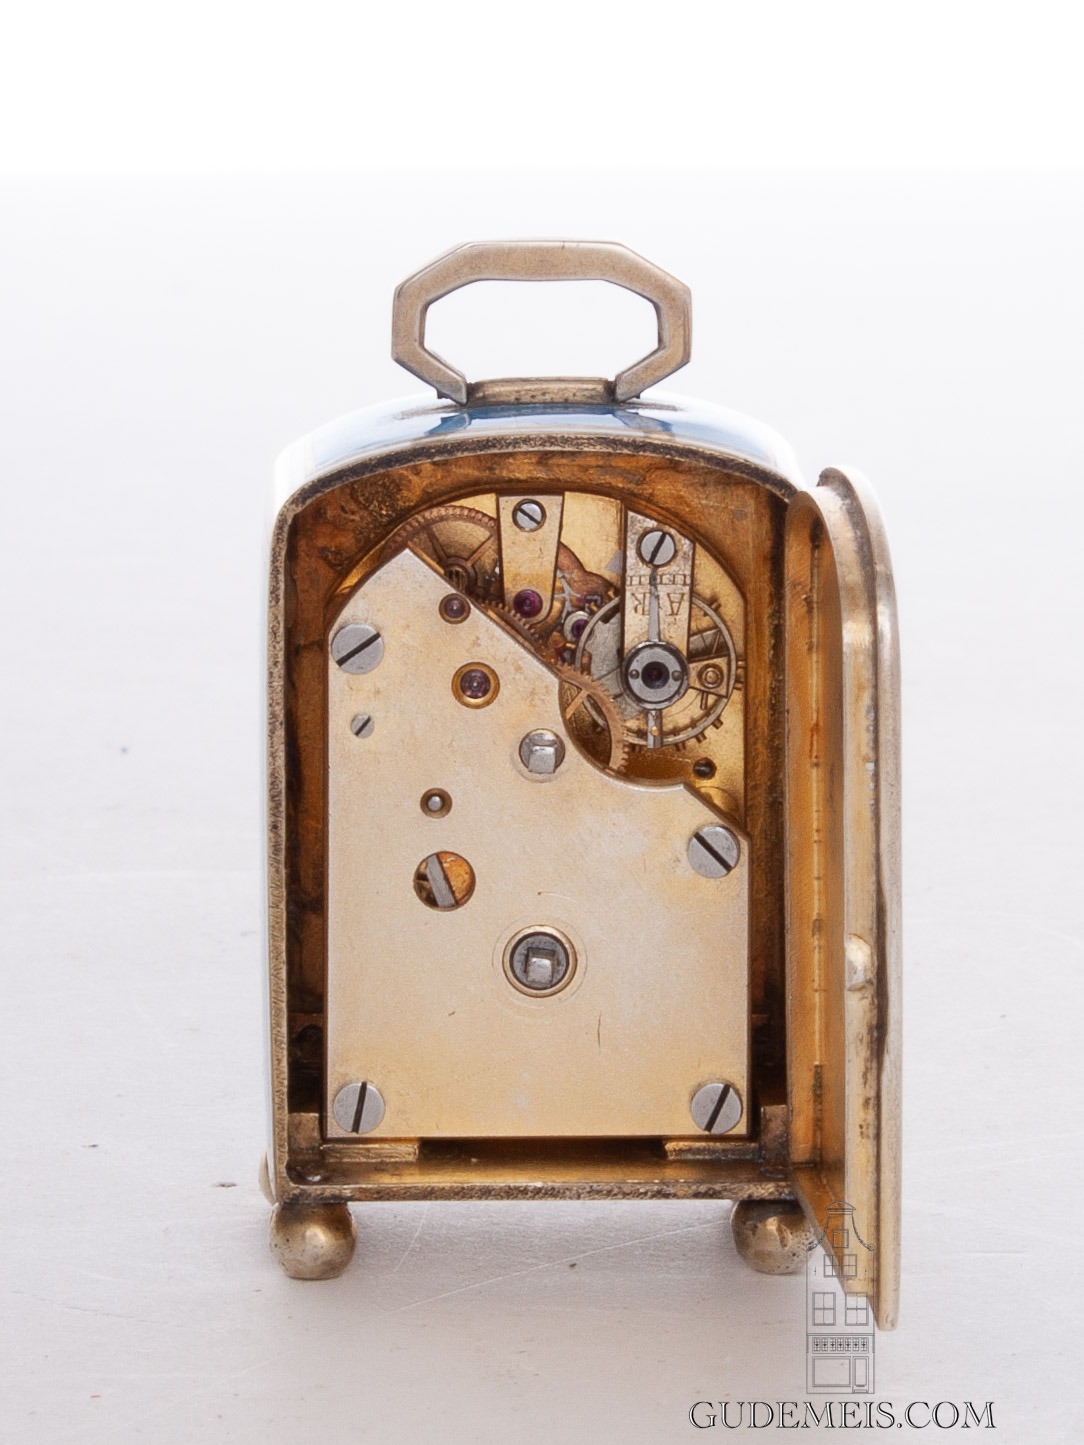 Swiss-French-silver-sub-miniature-guilloche-enamel-translucent-antique-carriage-clock